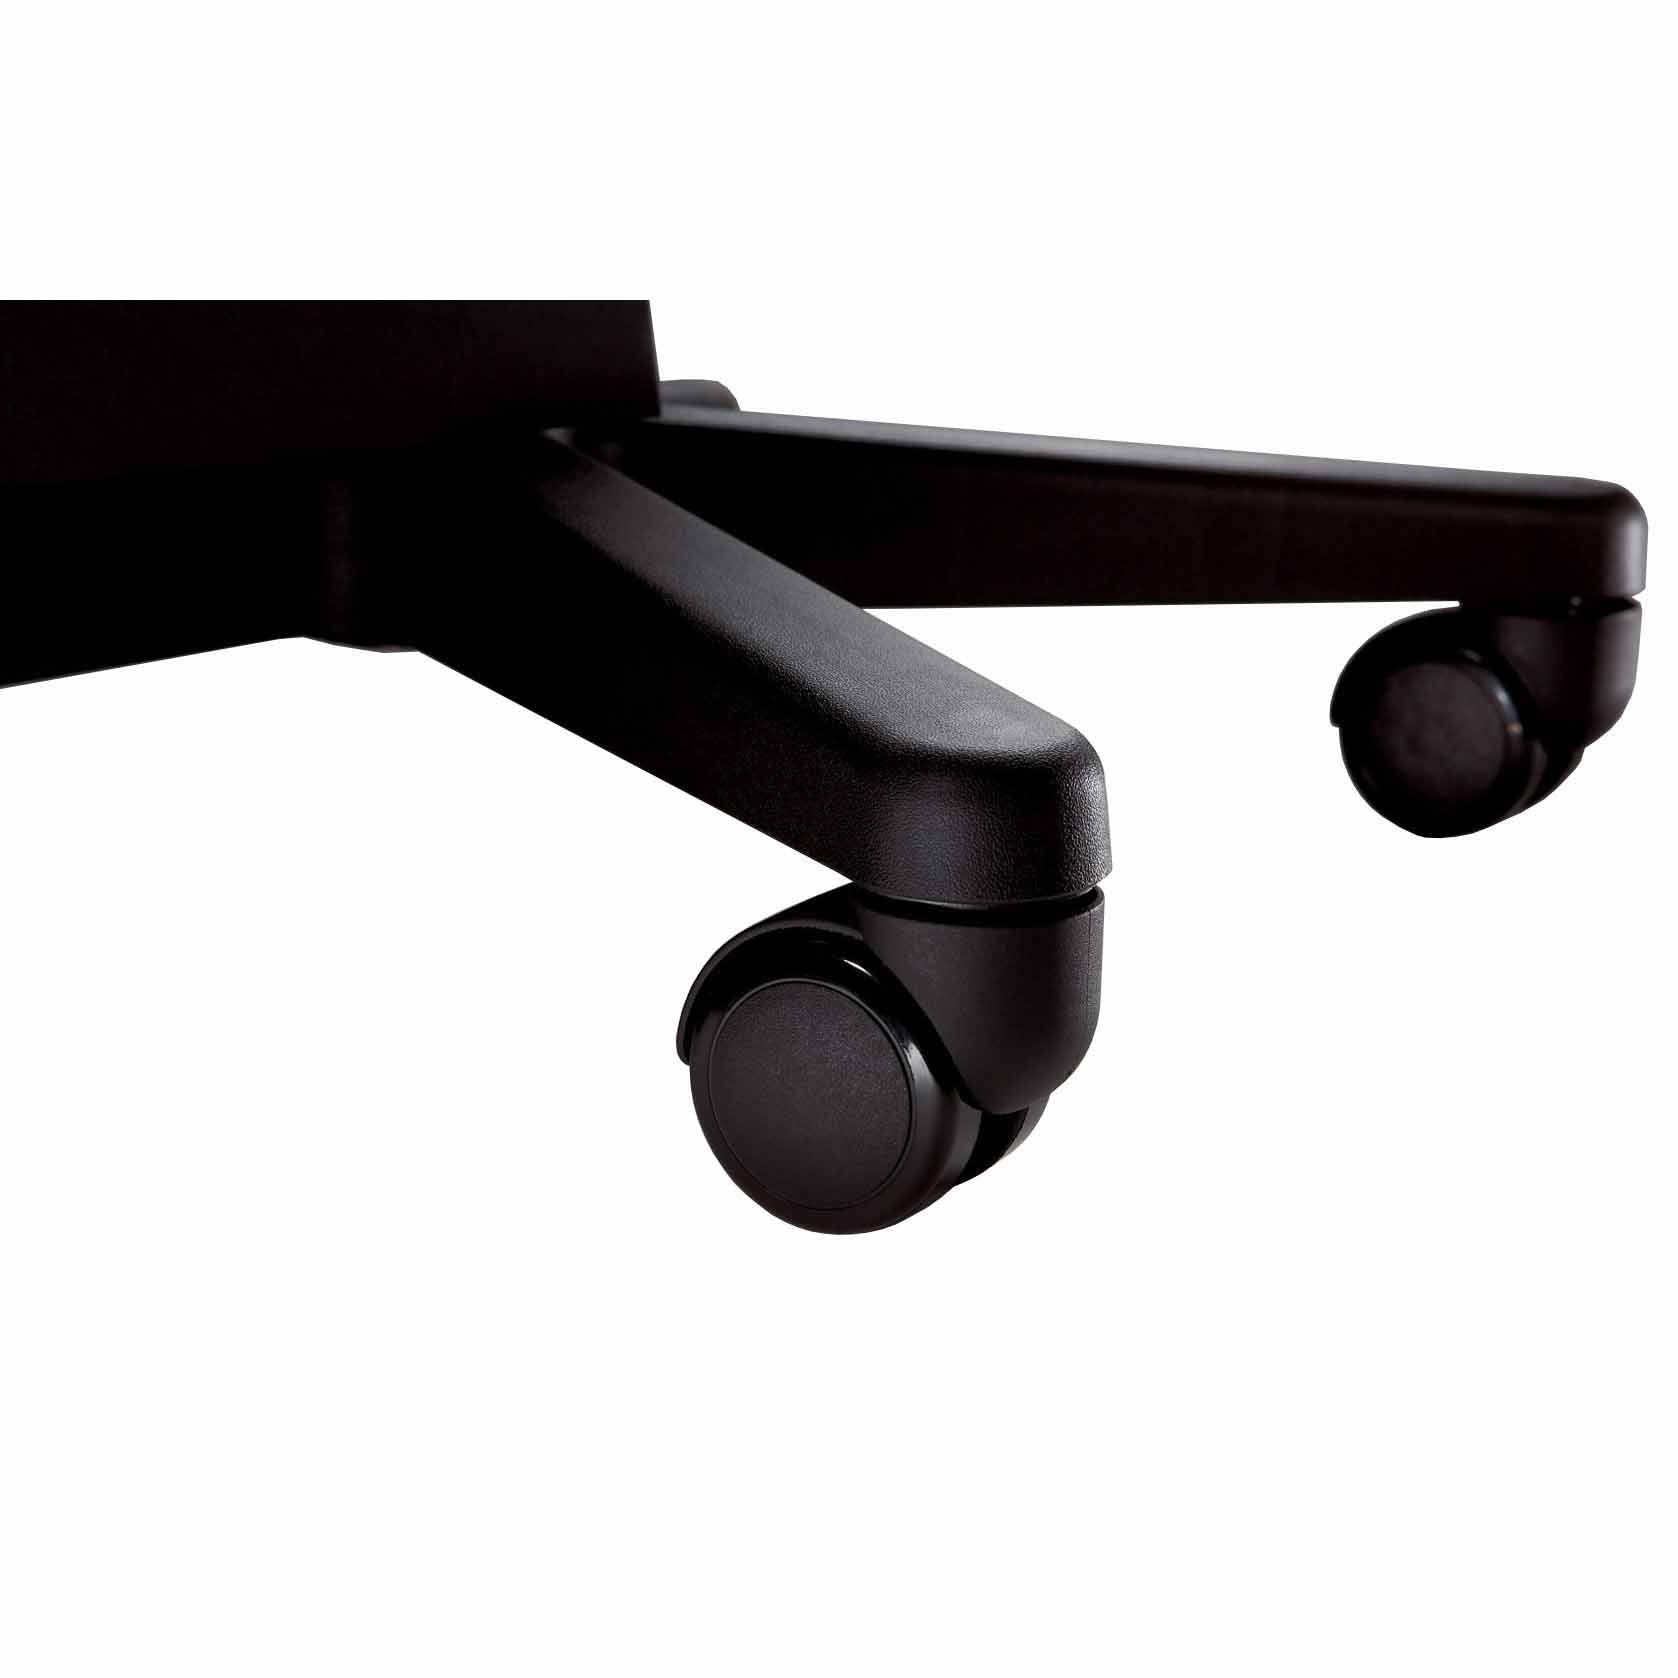 Ritter 271 Adjustable Stool - Soft Rubber Casters